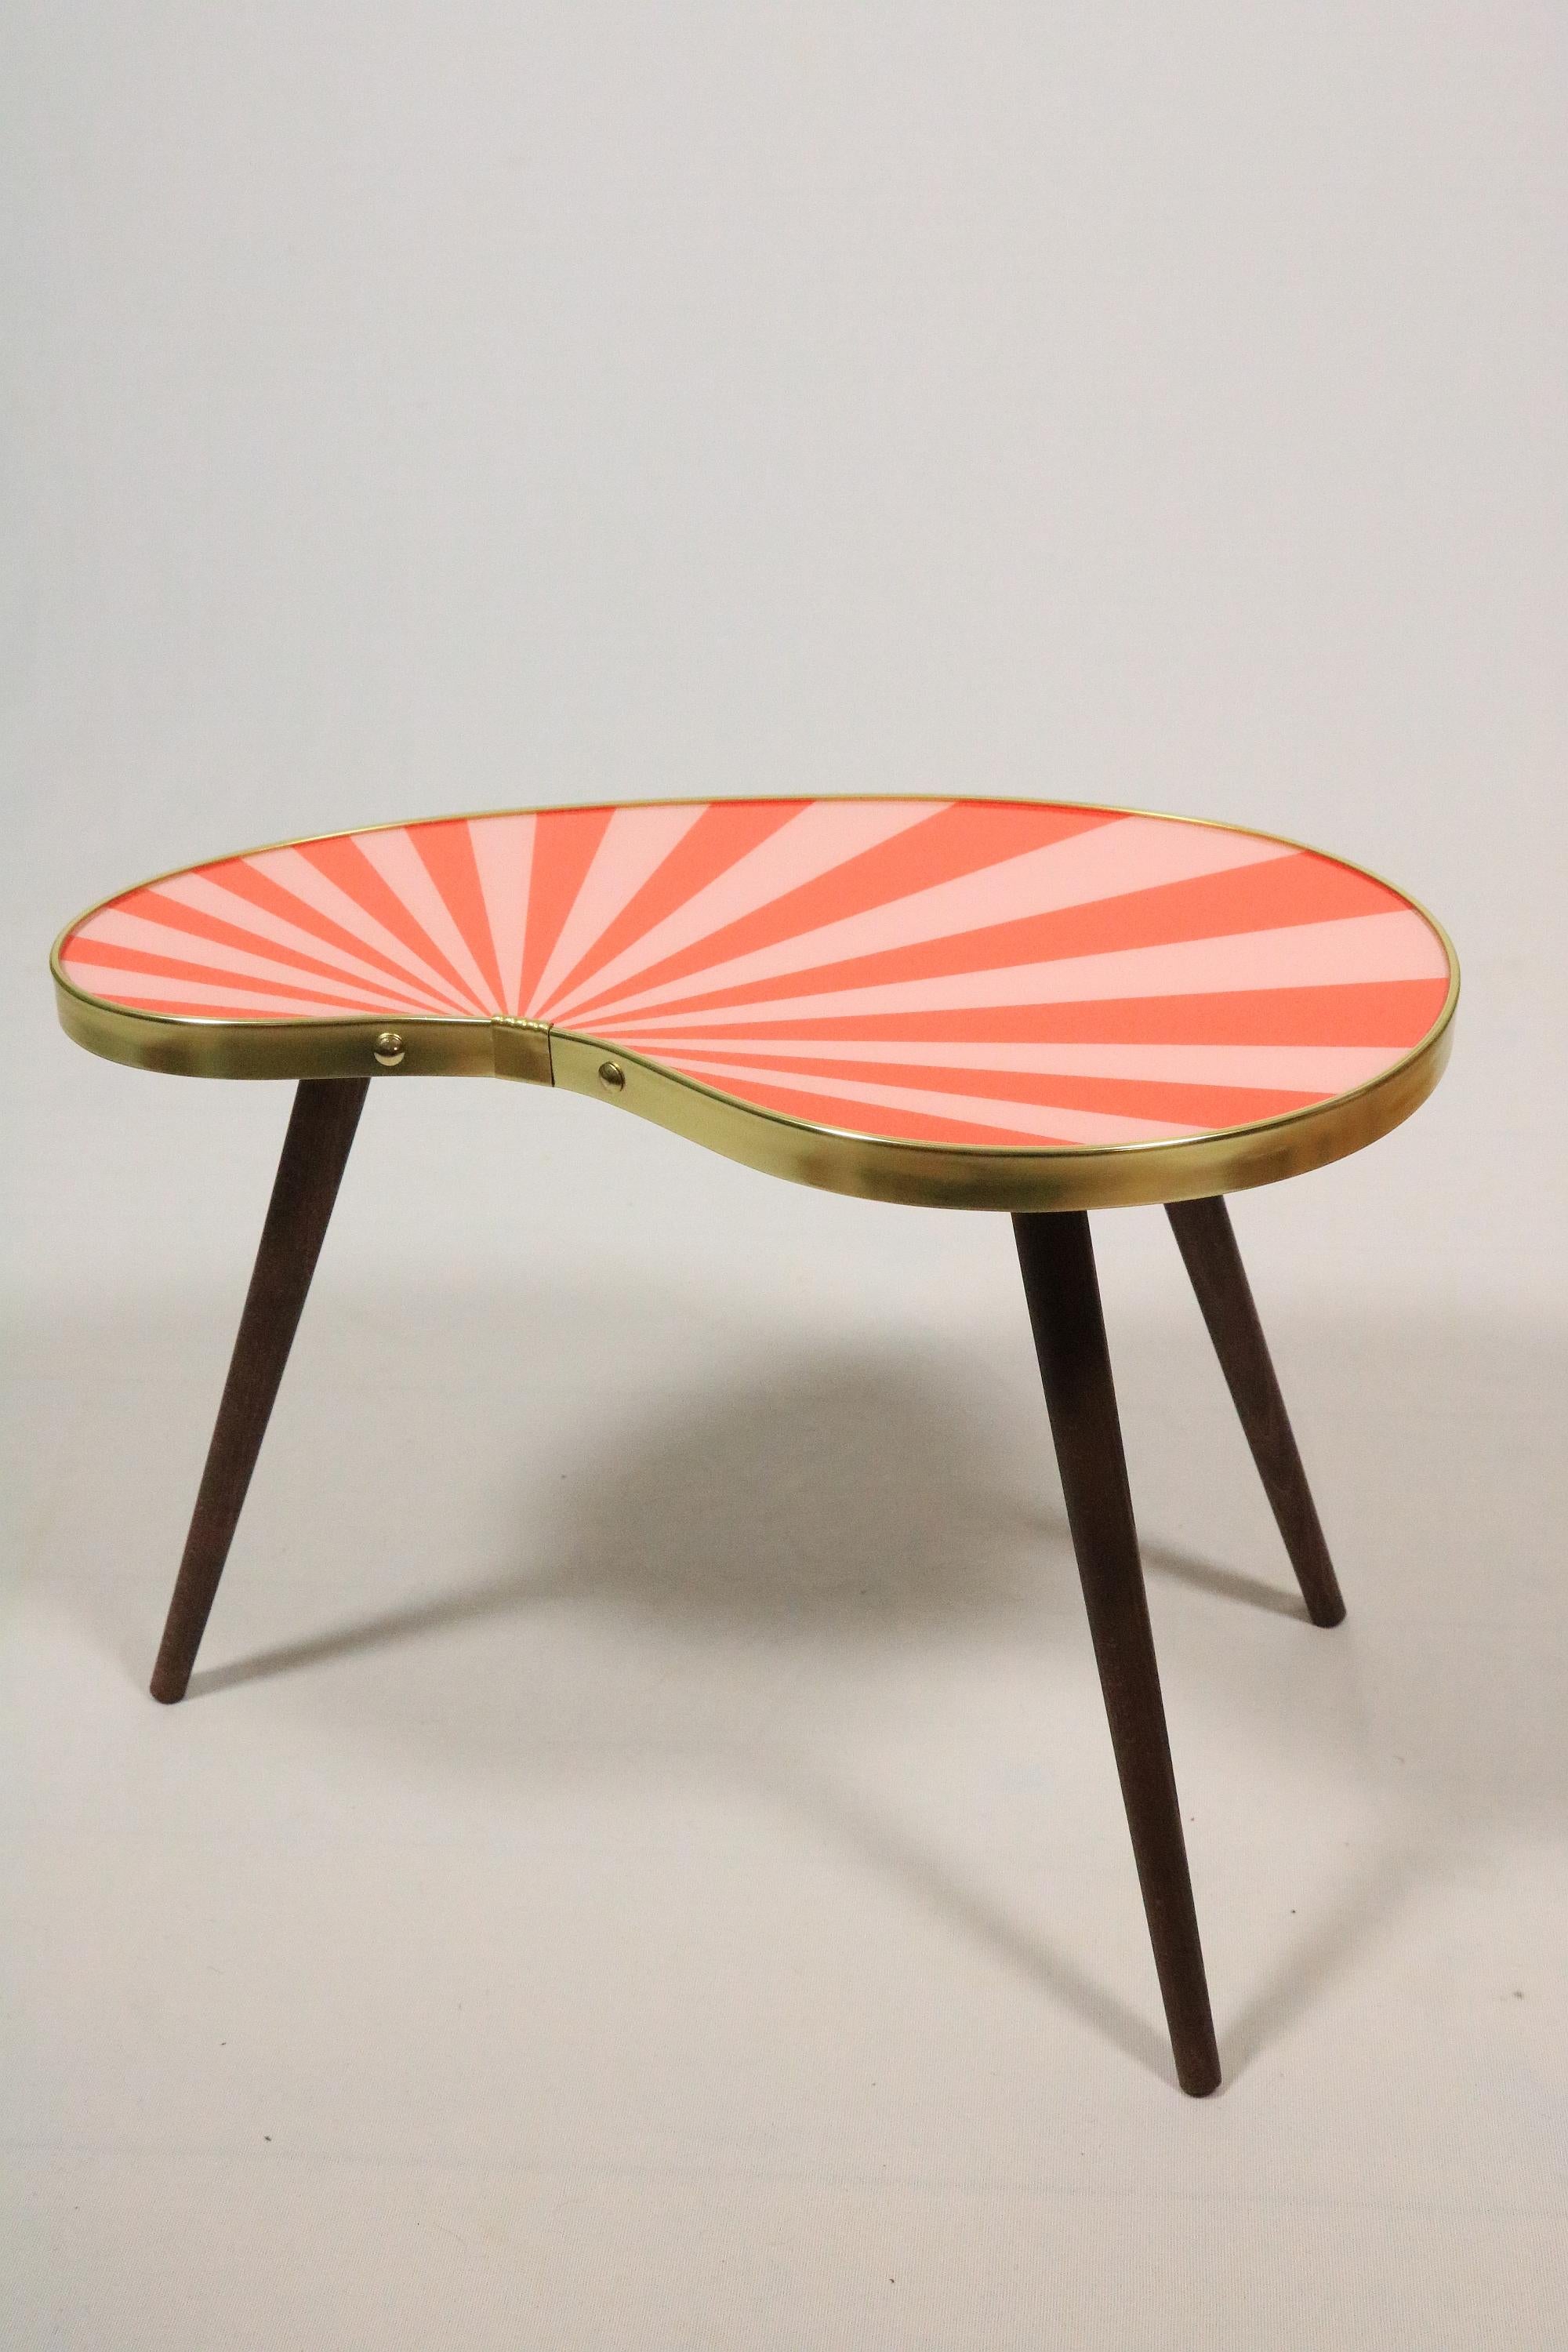 Exclusive offer of one small kidney shaped side table. 
Red-Pink Stripes (see other offers: 4 different colours and patterns avaiable).

These tables are a high-quality new production after original models of the 1950s.

PLEASE note dimensions